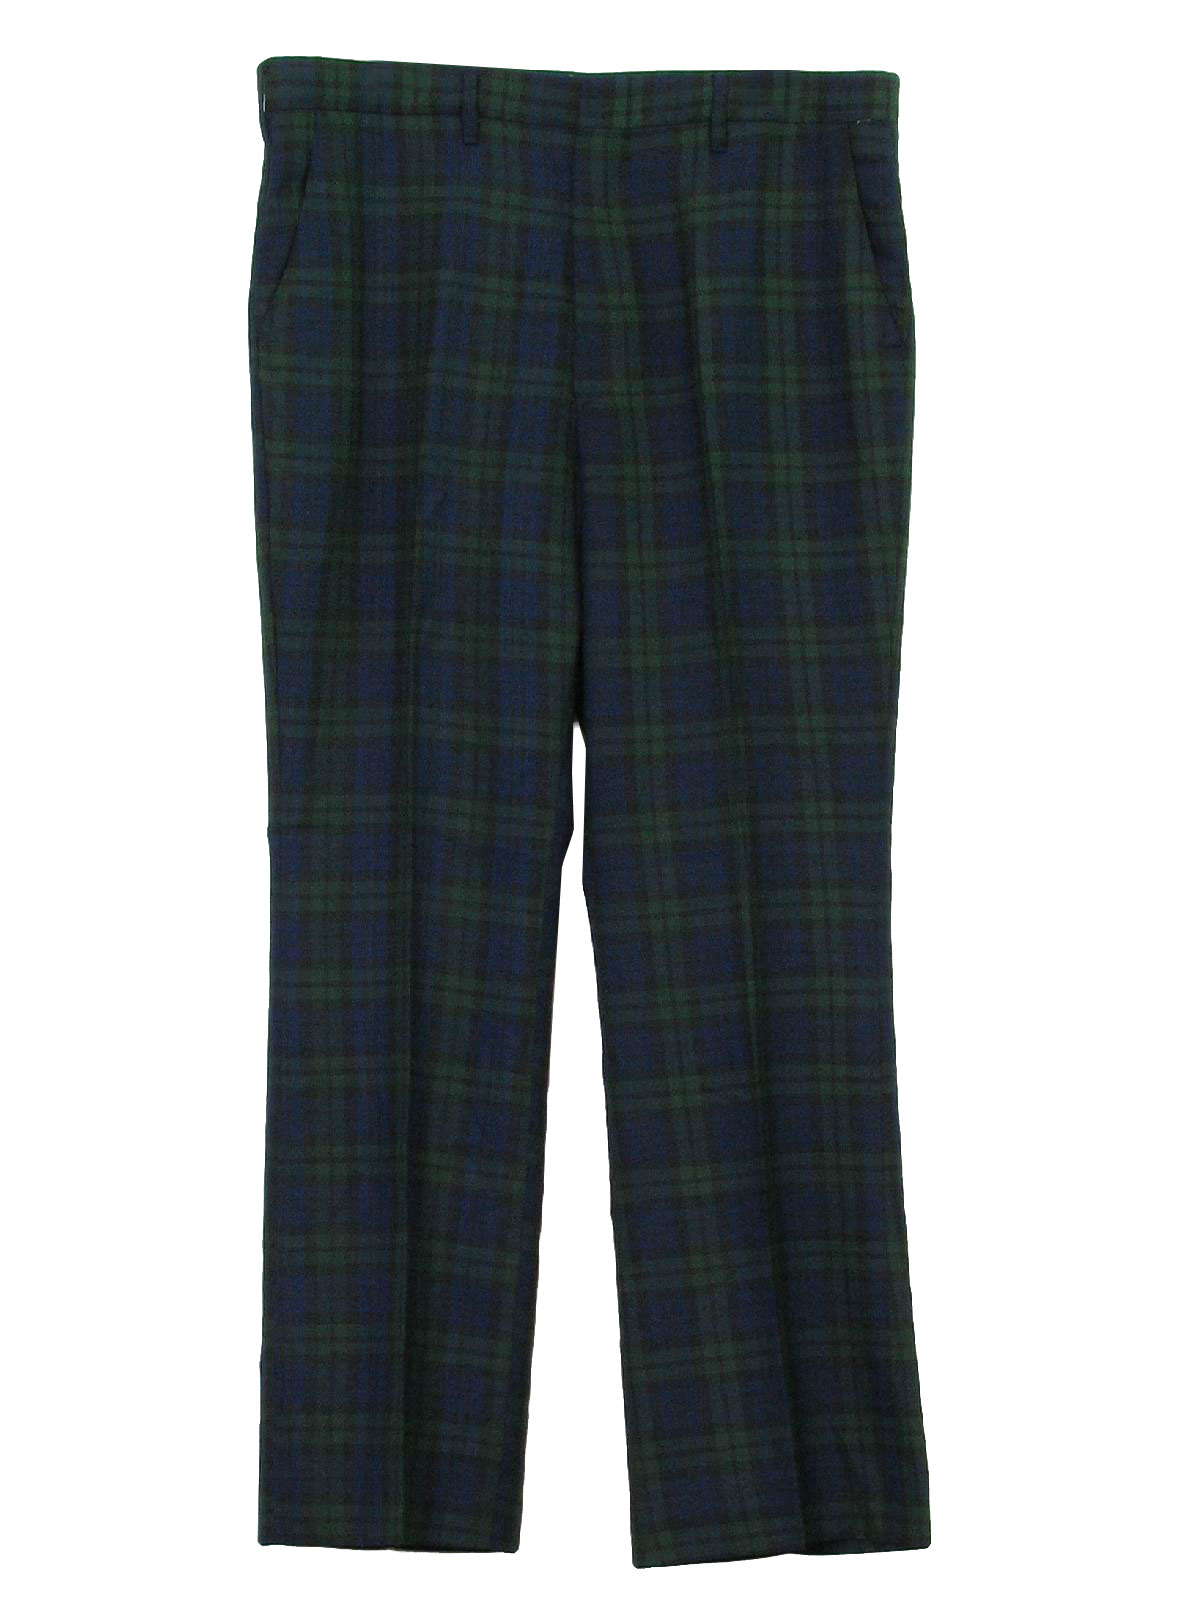 70s Retro Pants: Late 70s -Care Label- Mens blue, black and green plaid ...